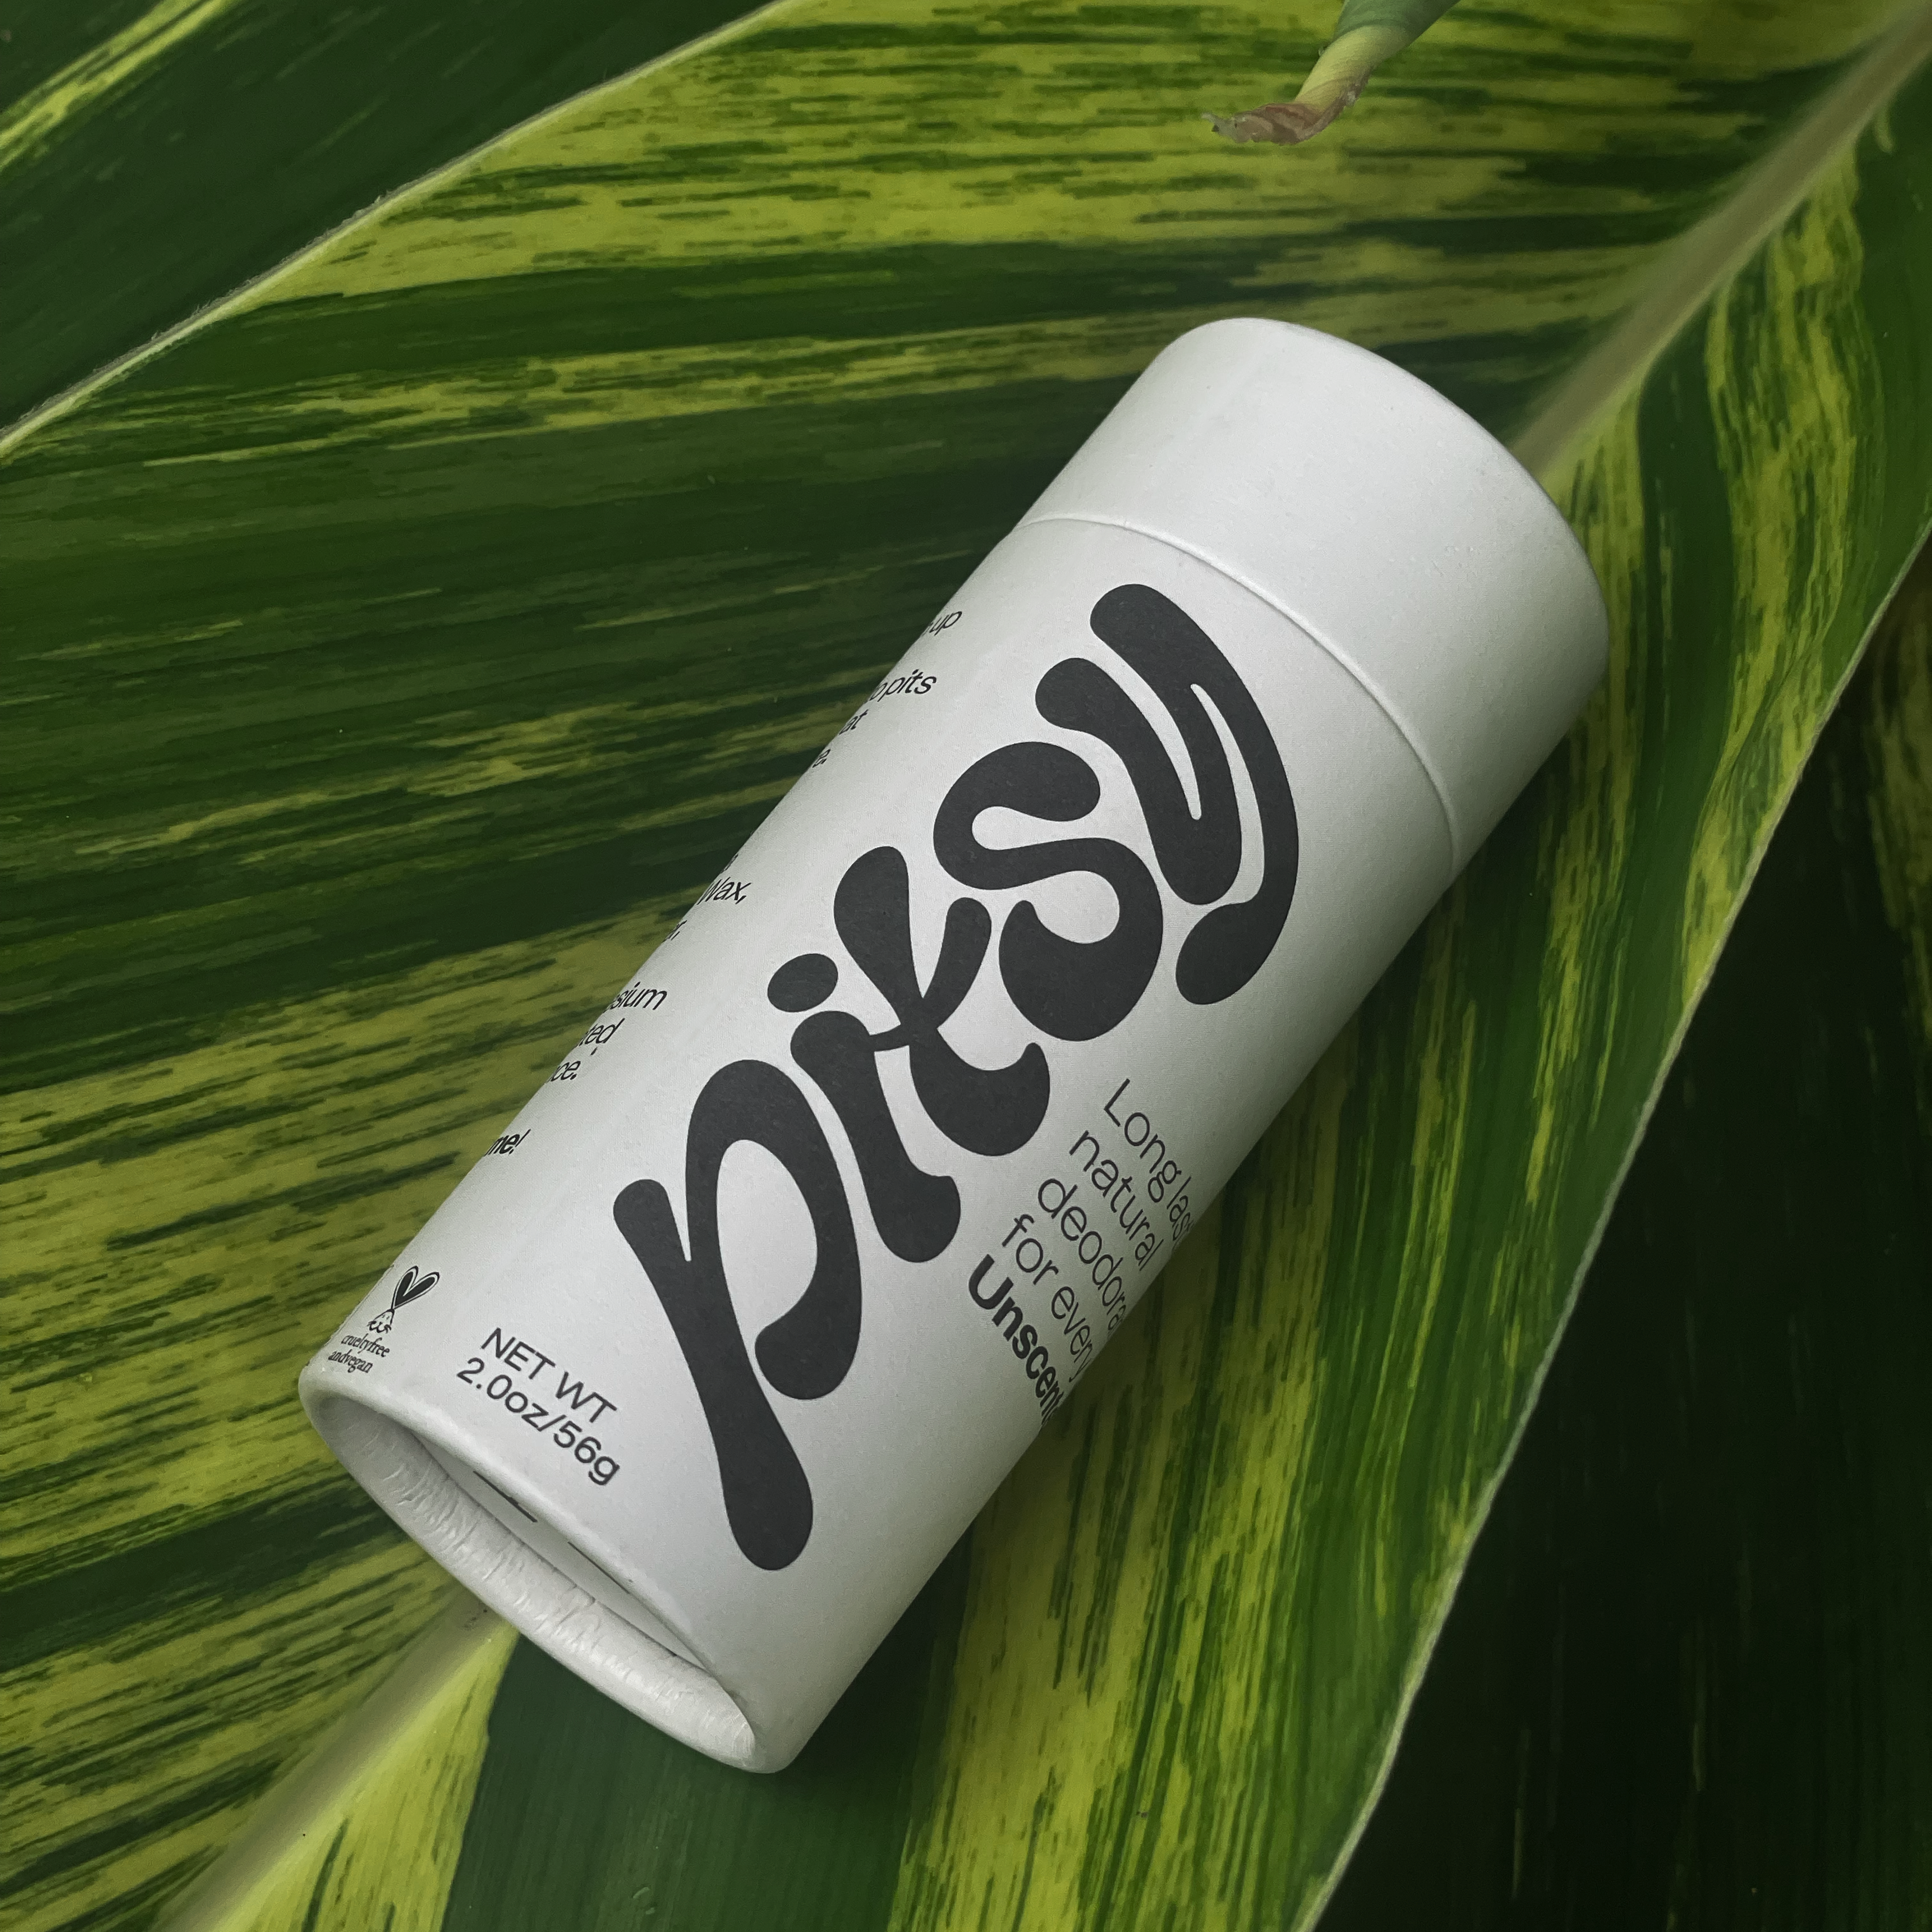 Pitsy Unscented Deodorant